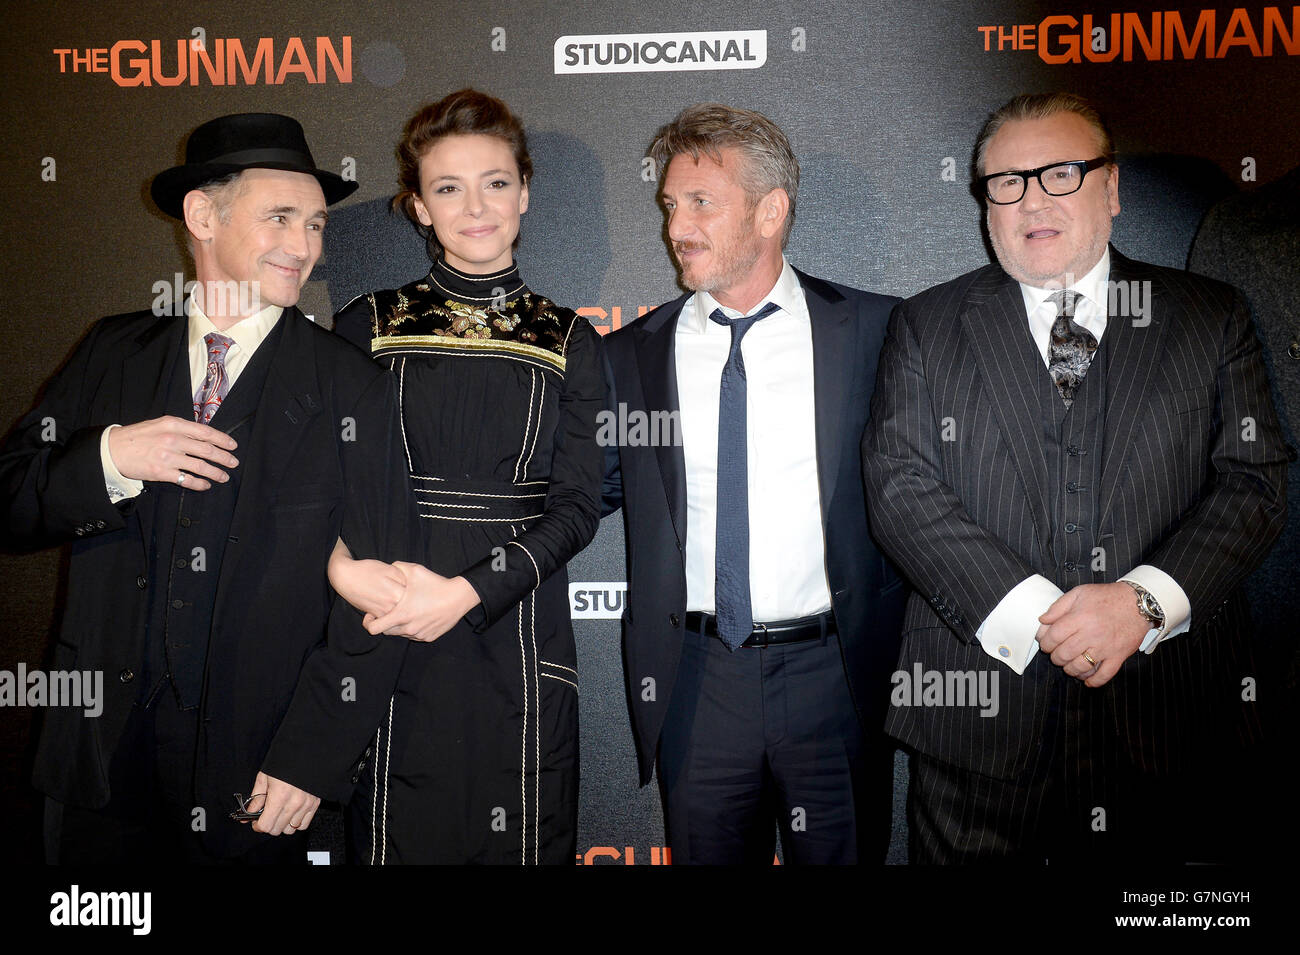 (left to right) Mark Rylance, Jasmine Trinca, Sean Penn and Ray Winstone attend the World Premiere of The Gunman at the BFI South Bank, London. PRESS ASSOCIATION Photo. Picture date: Monday February 16, 2015.Photo credit should read: Anthony Devlin/PA Wire Stock Photo